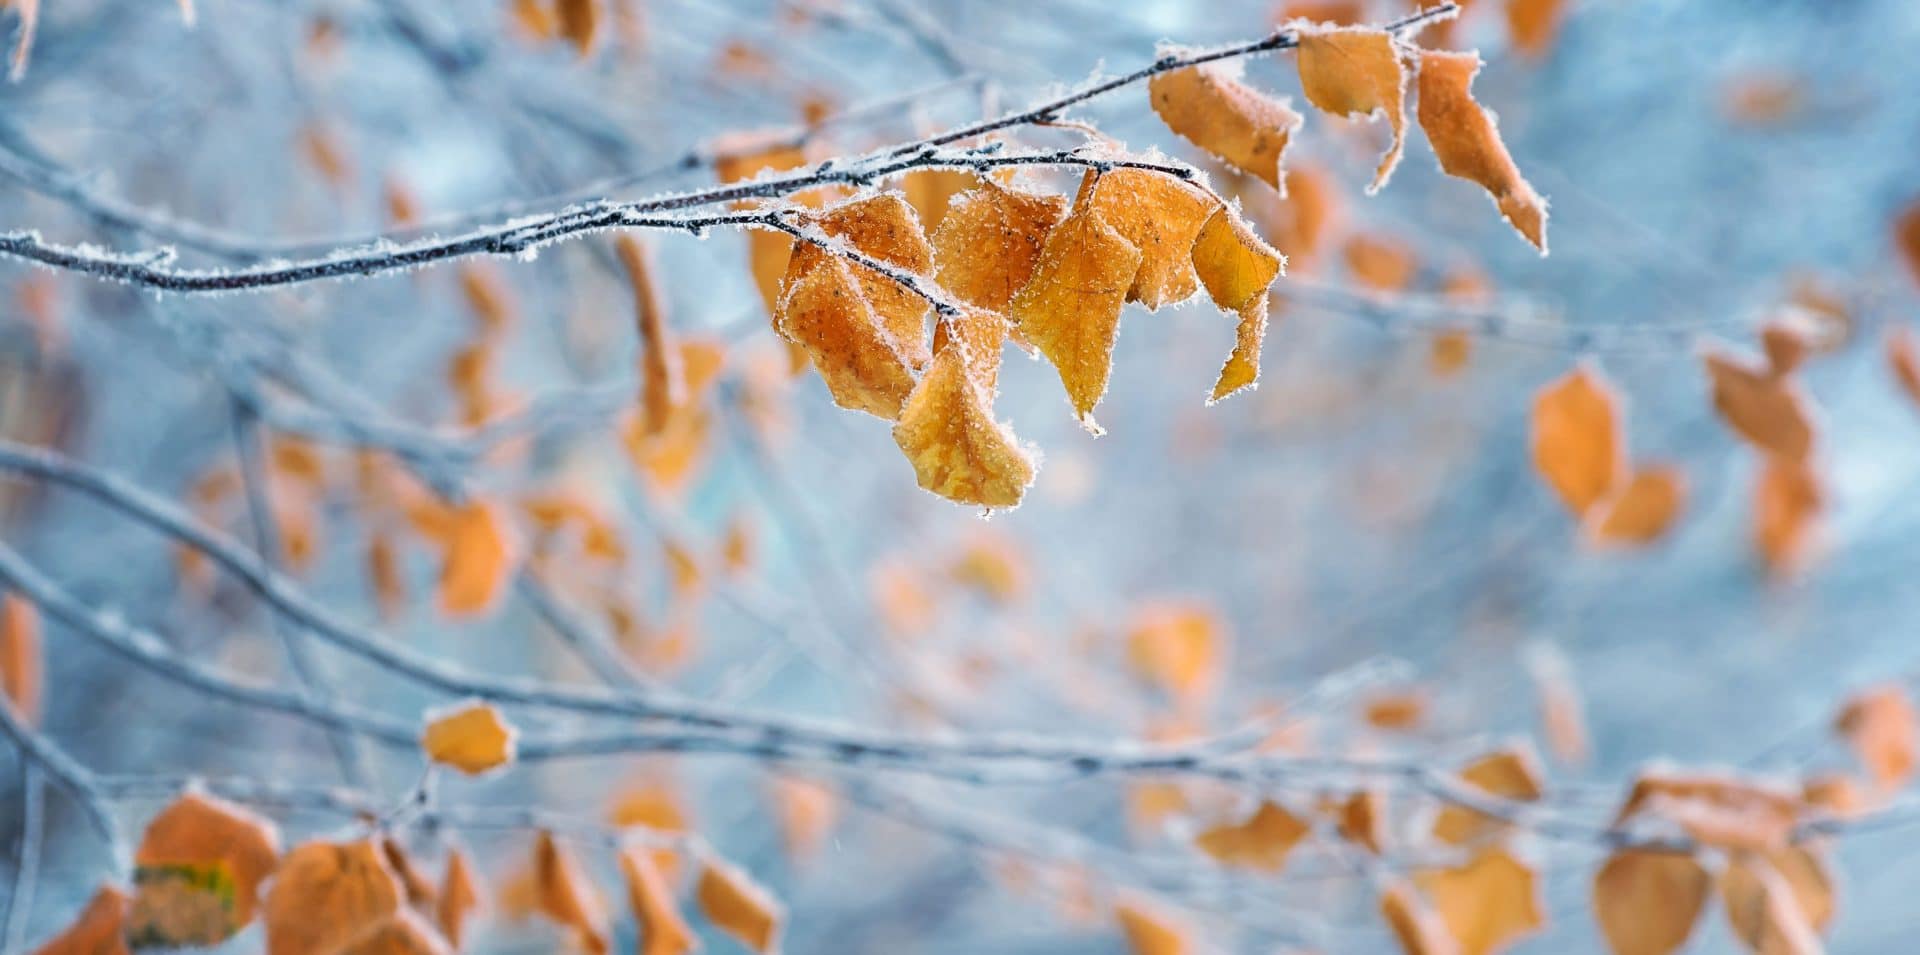 Birch with yellow leaves in frost